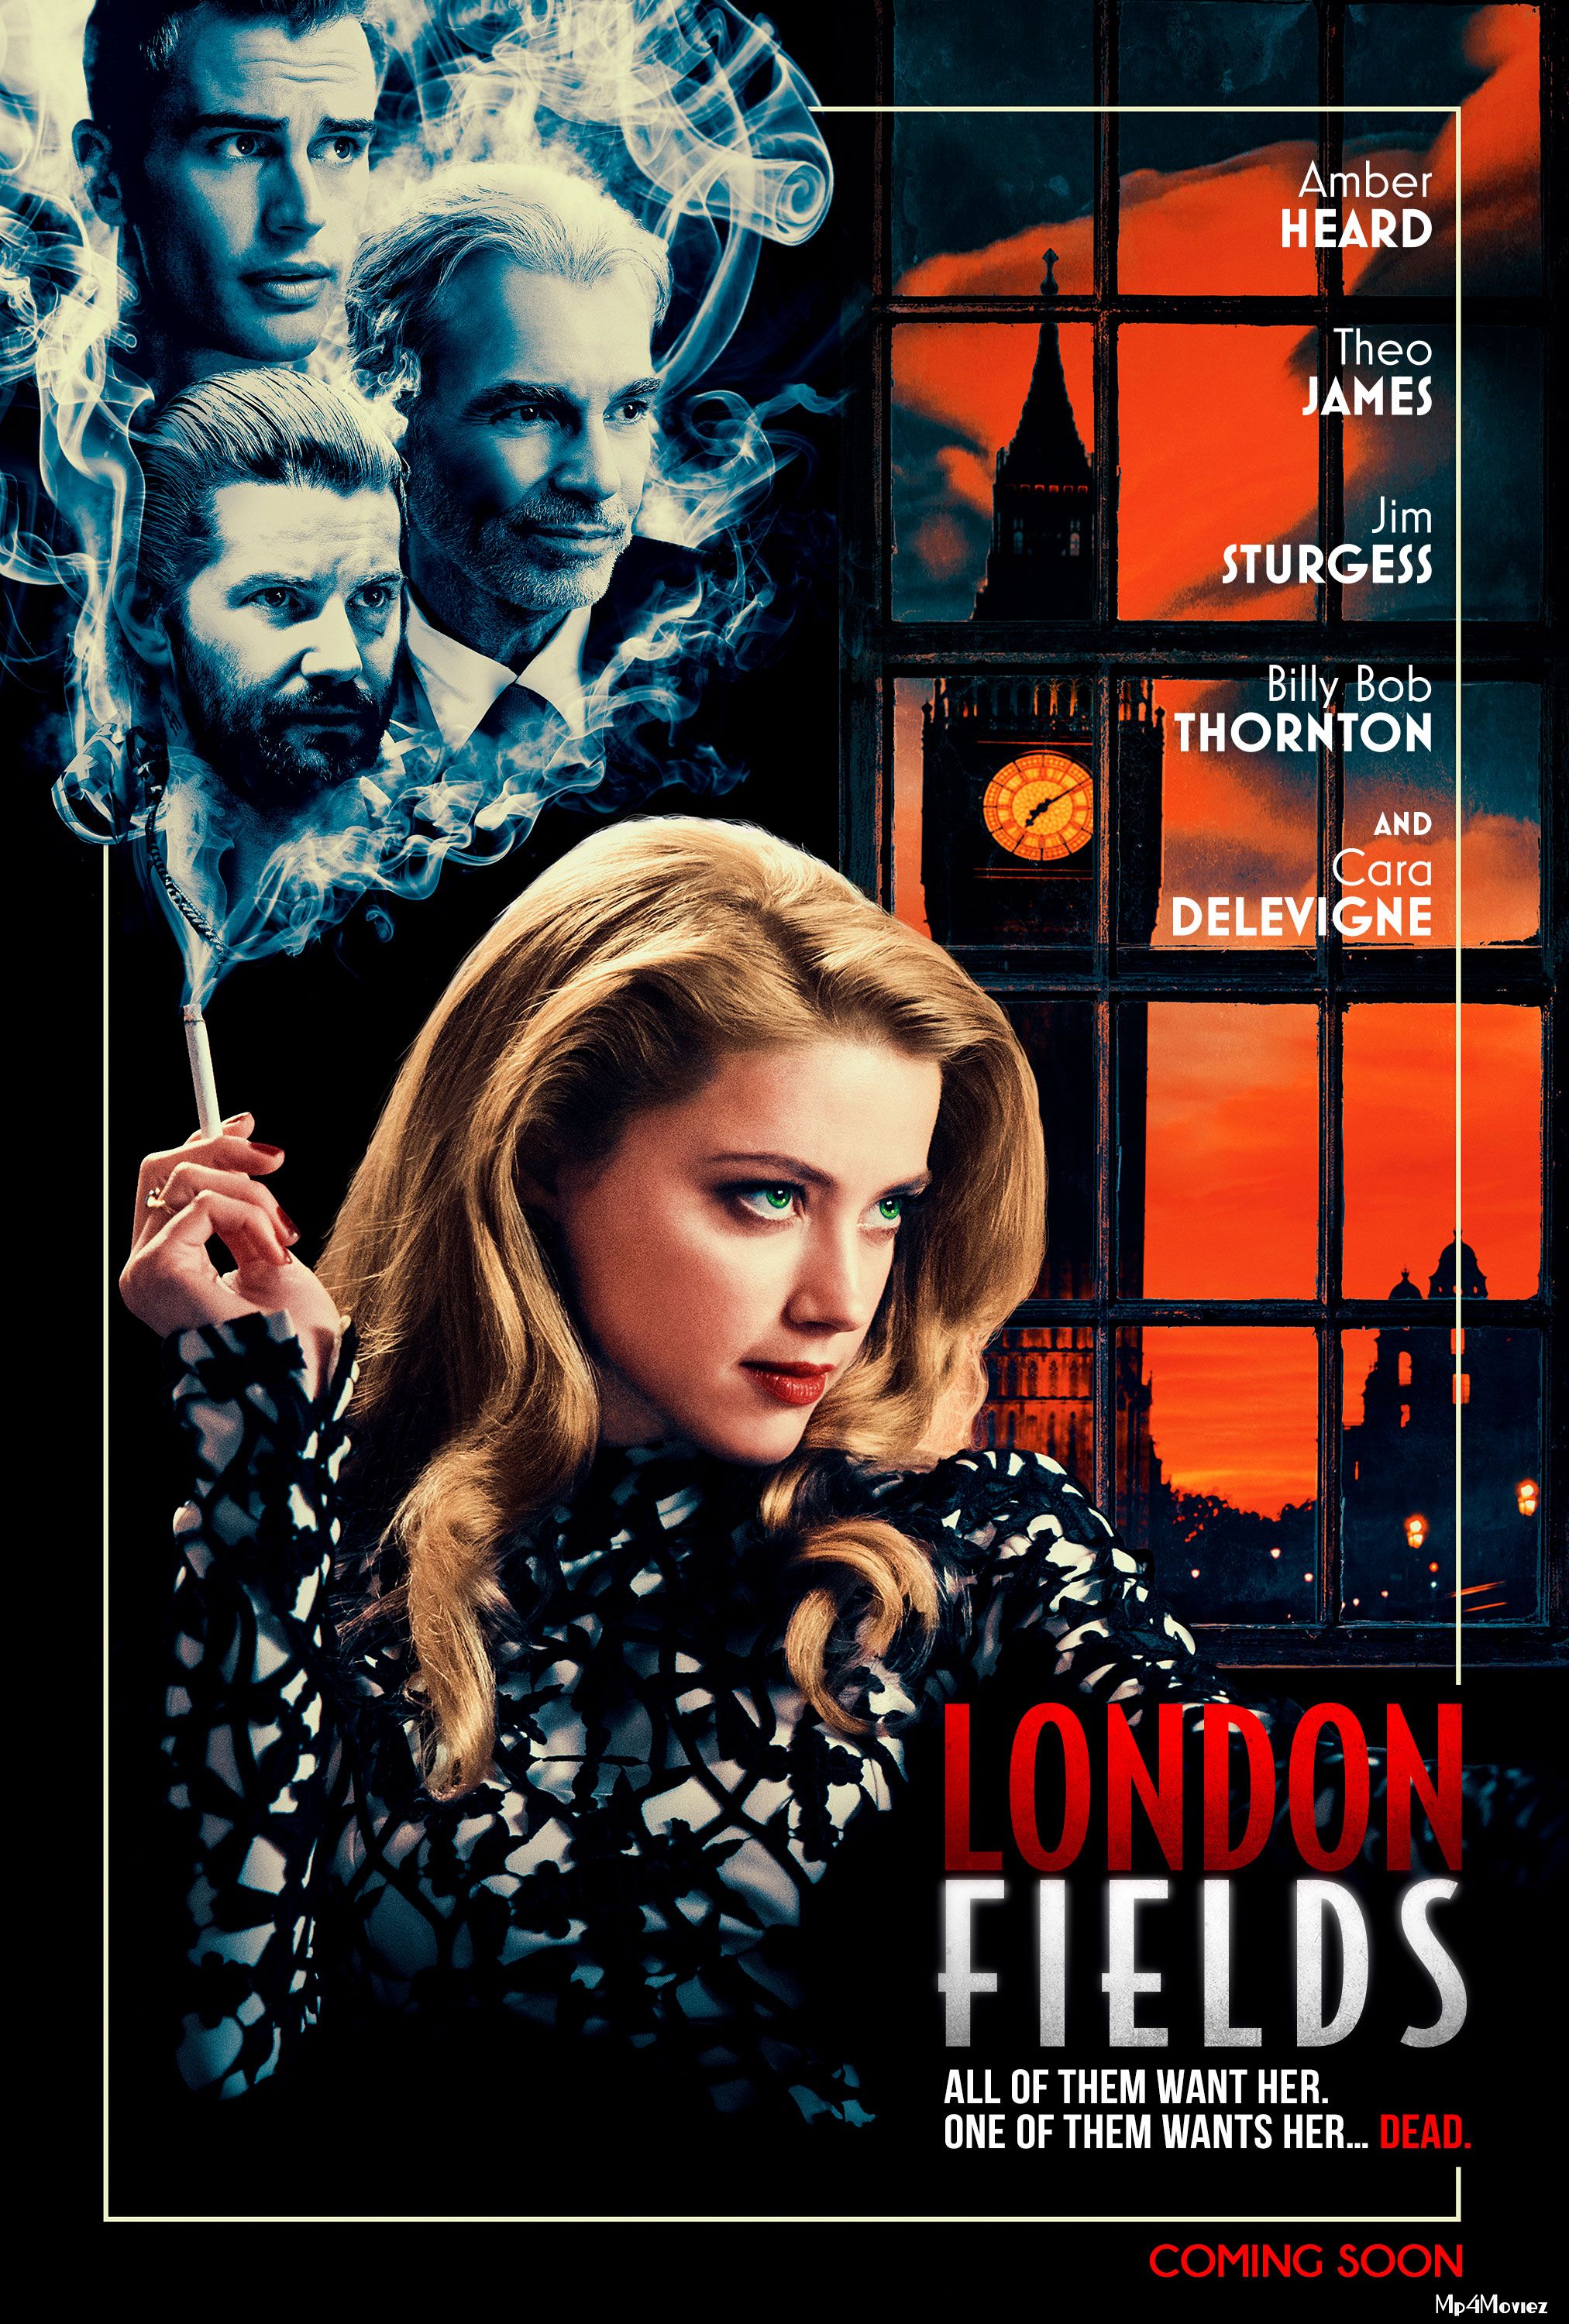 London Fields 2018 Hindi Dubbed Movie download full movie